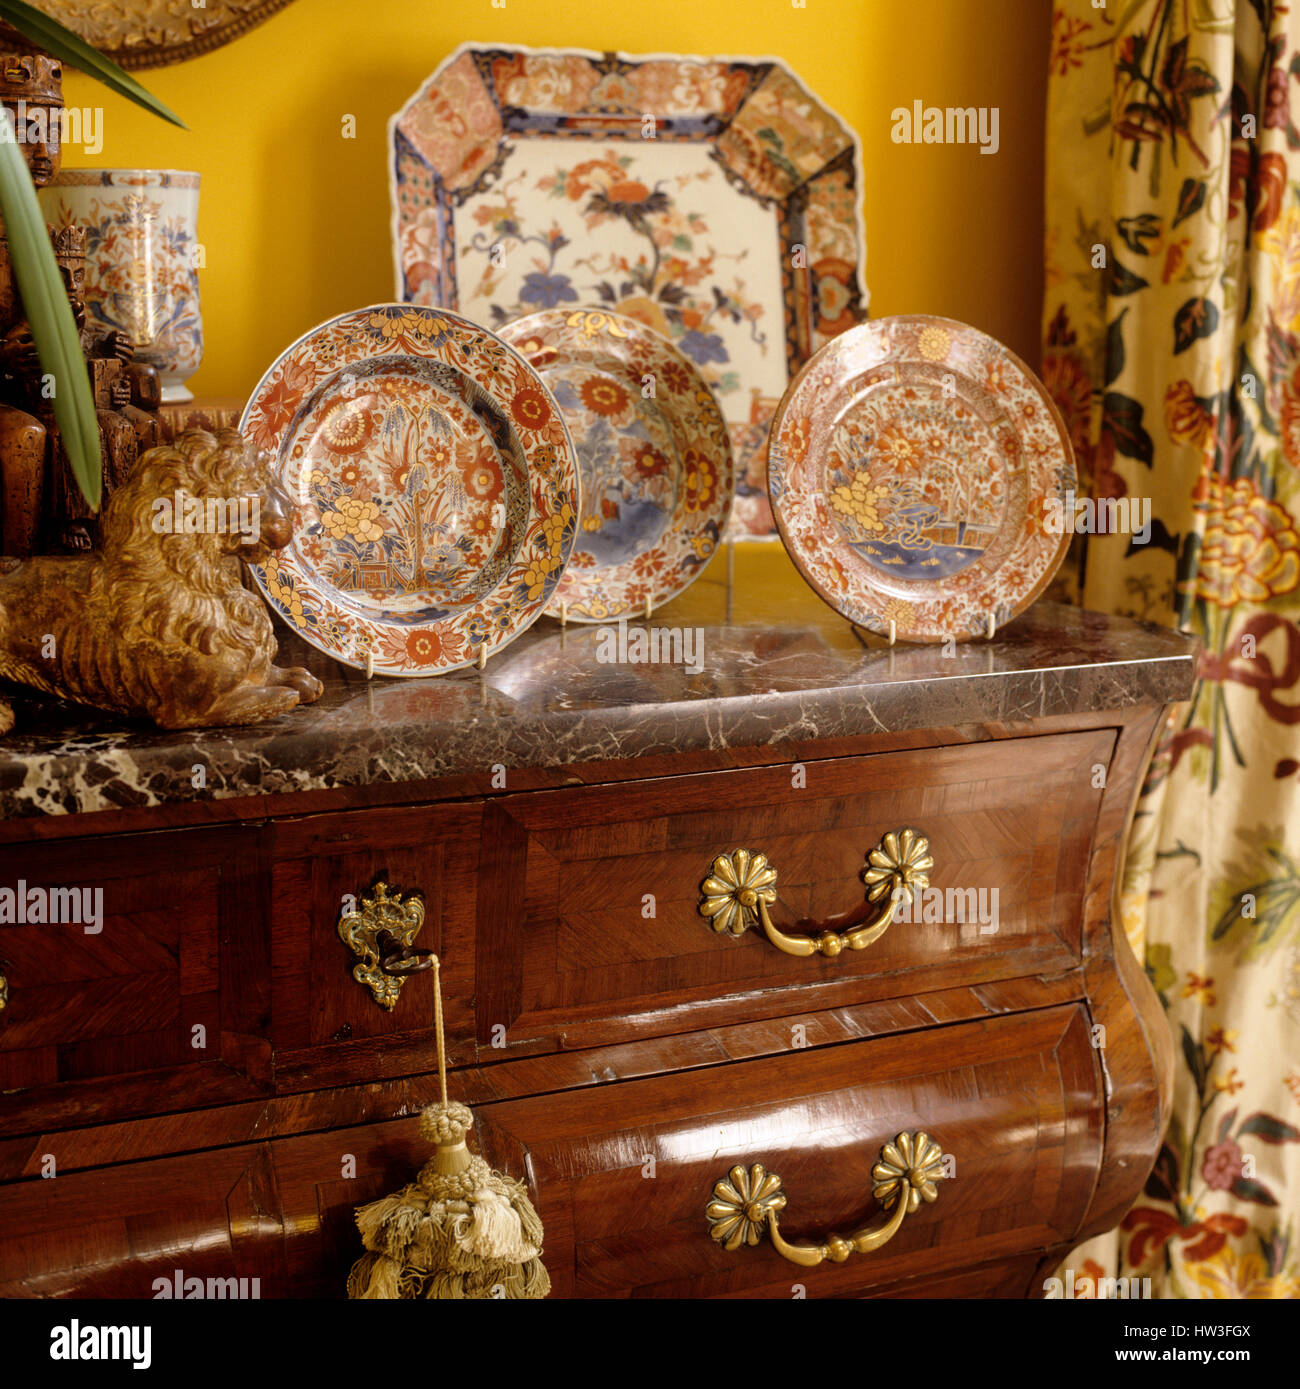 Floral patterned plates on chest of drawers. Stock Photo